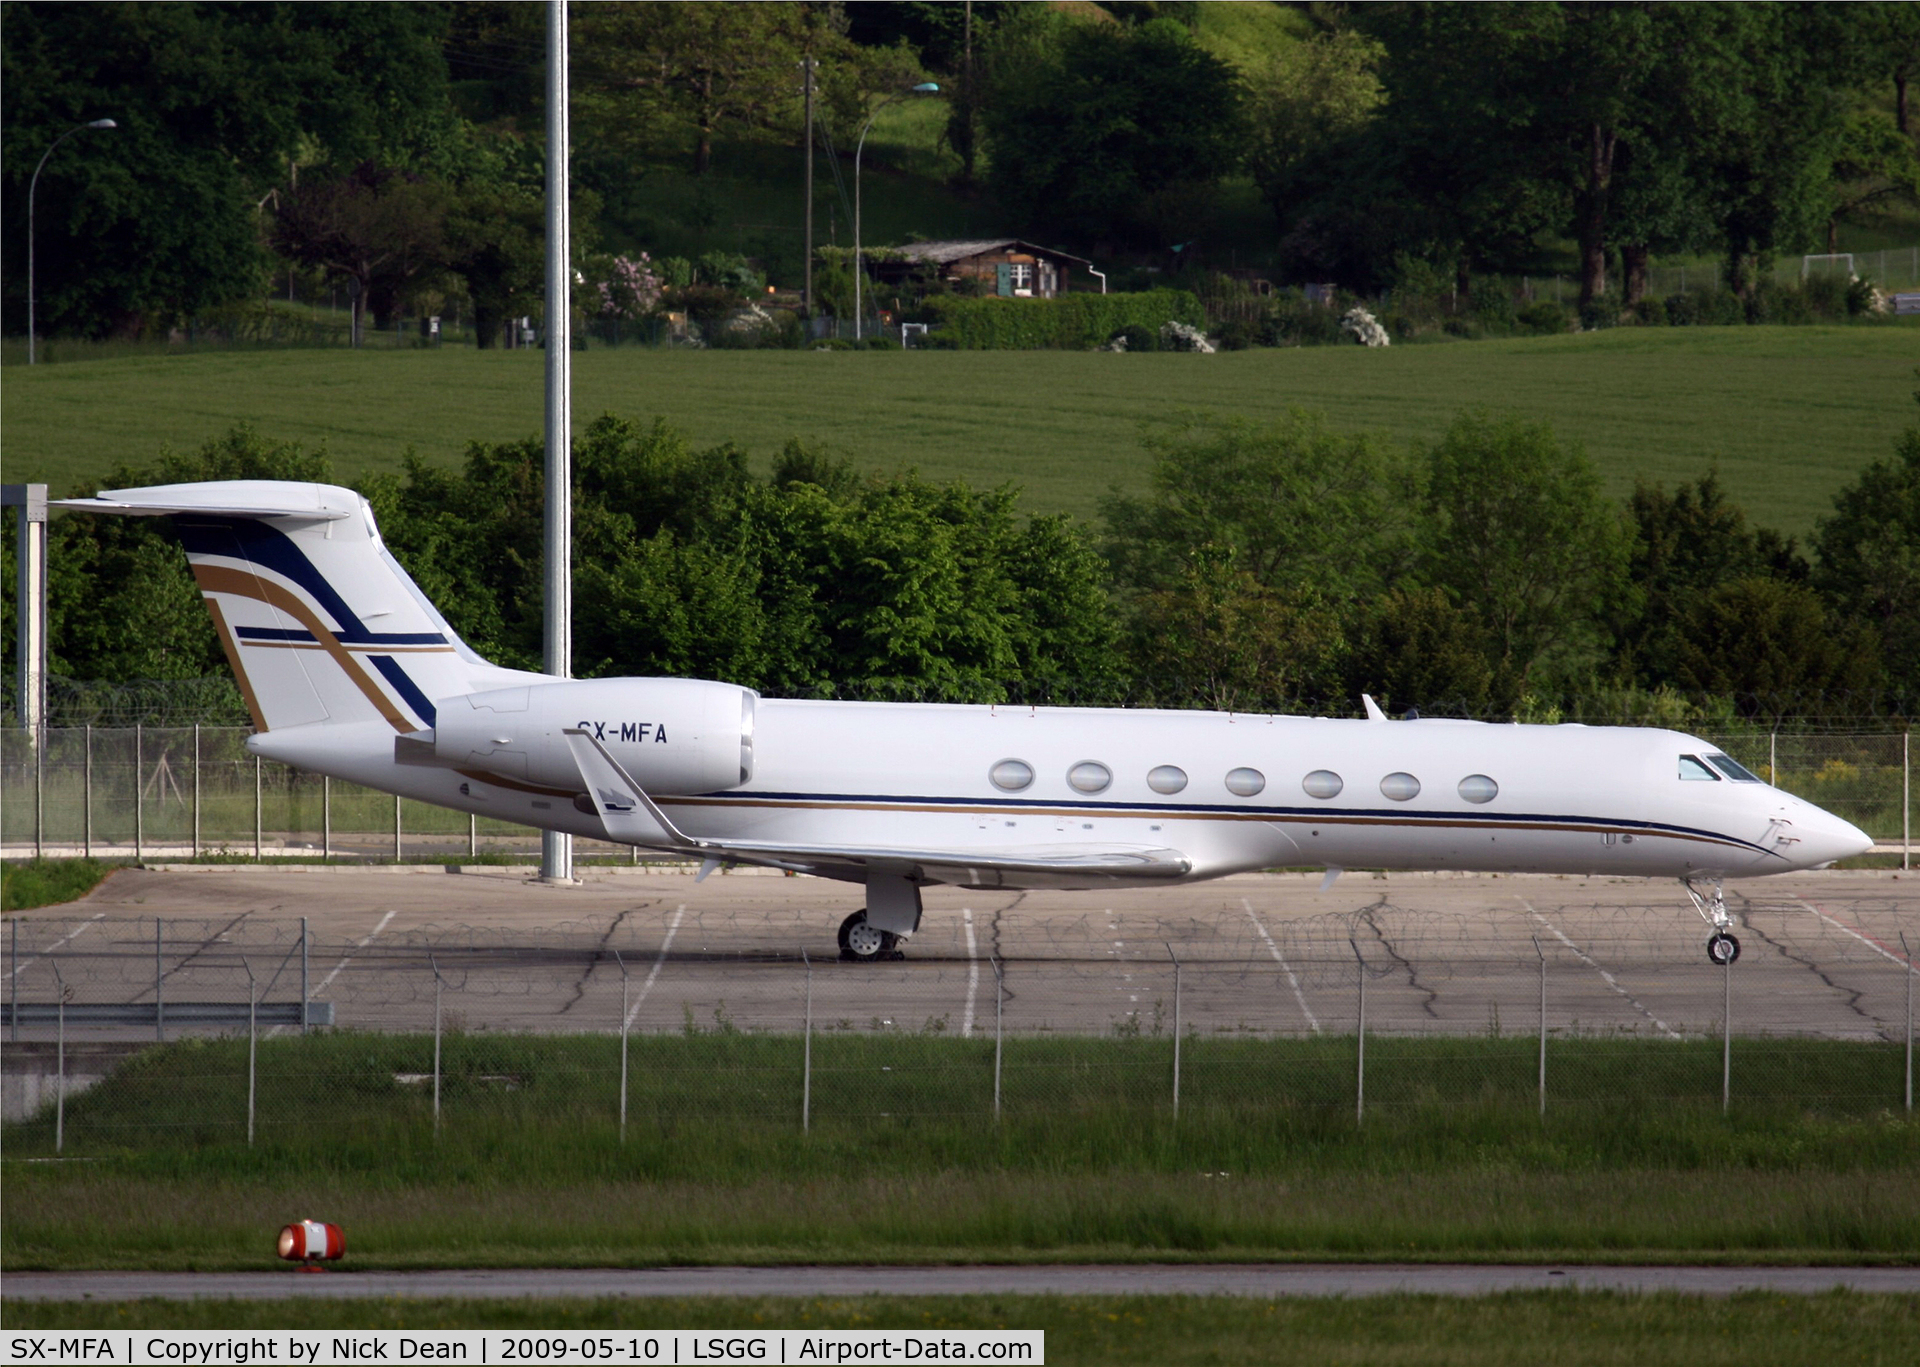 SX-MFA, 2007 Gulfstream Aerospace V-SP G550 C/N 5197, LSGG Parked in parking lot P48 which is across the field from the park on the French side (EBACE 2009)